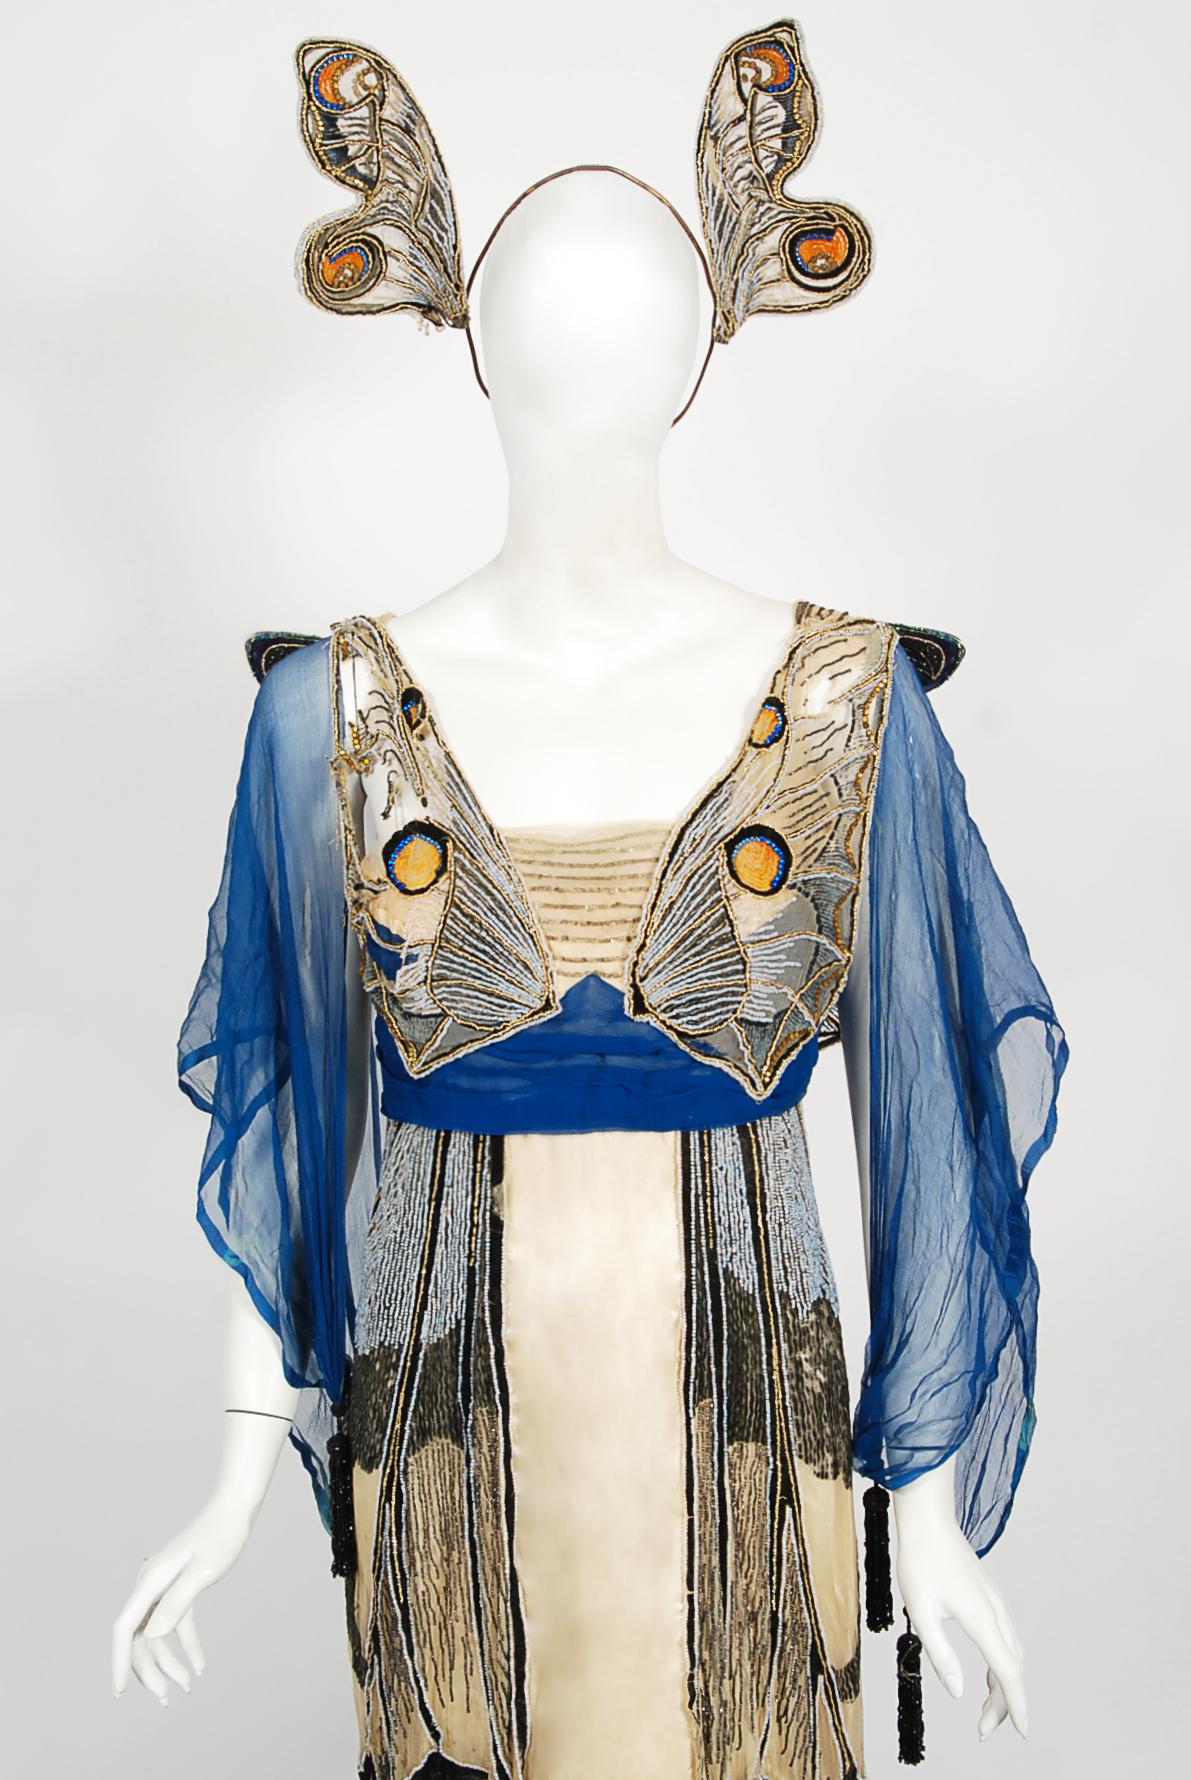 An absolutely magically and incredibly rare museum worthy House of Worth by Jean-Philippe Worth haute couture butterfly motif Art Nouveau trained gown and matching metal headpiece dating back to 1912. This elaborate gown was custom commissioned by